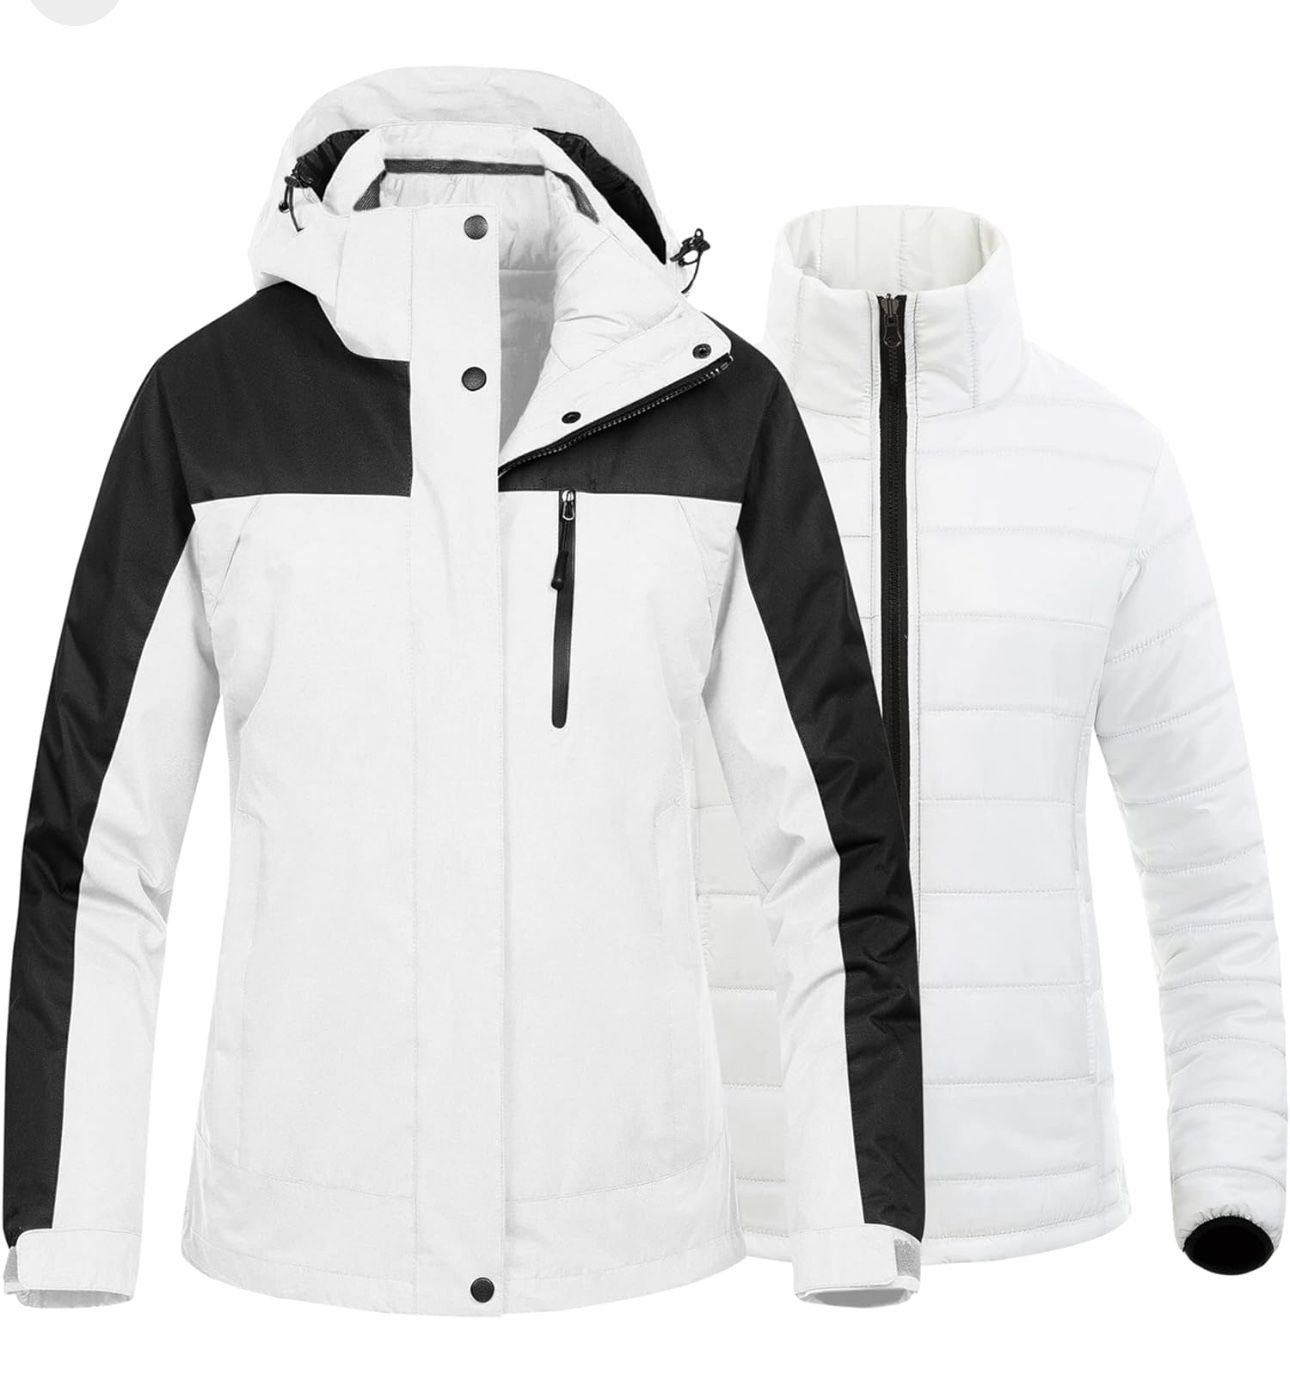 CREATMO US Women's 3 In 1 Waterproof Ski Jacket - Large  Brand new with tags yours for $79.99